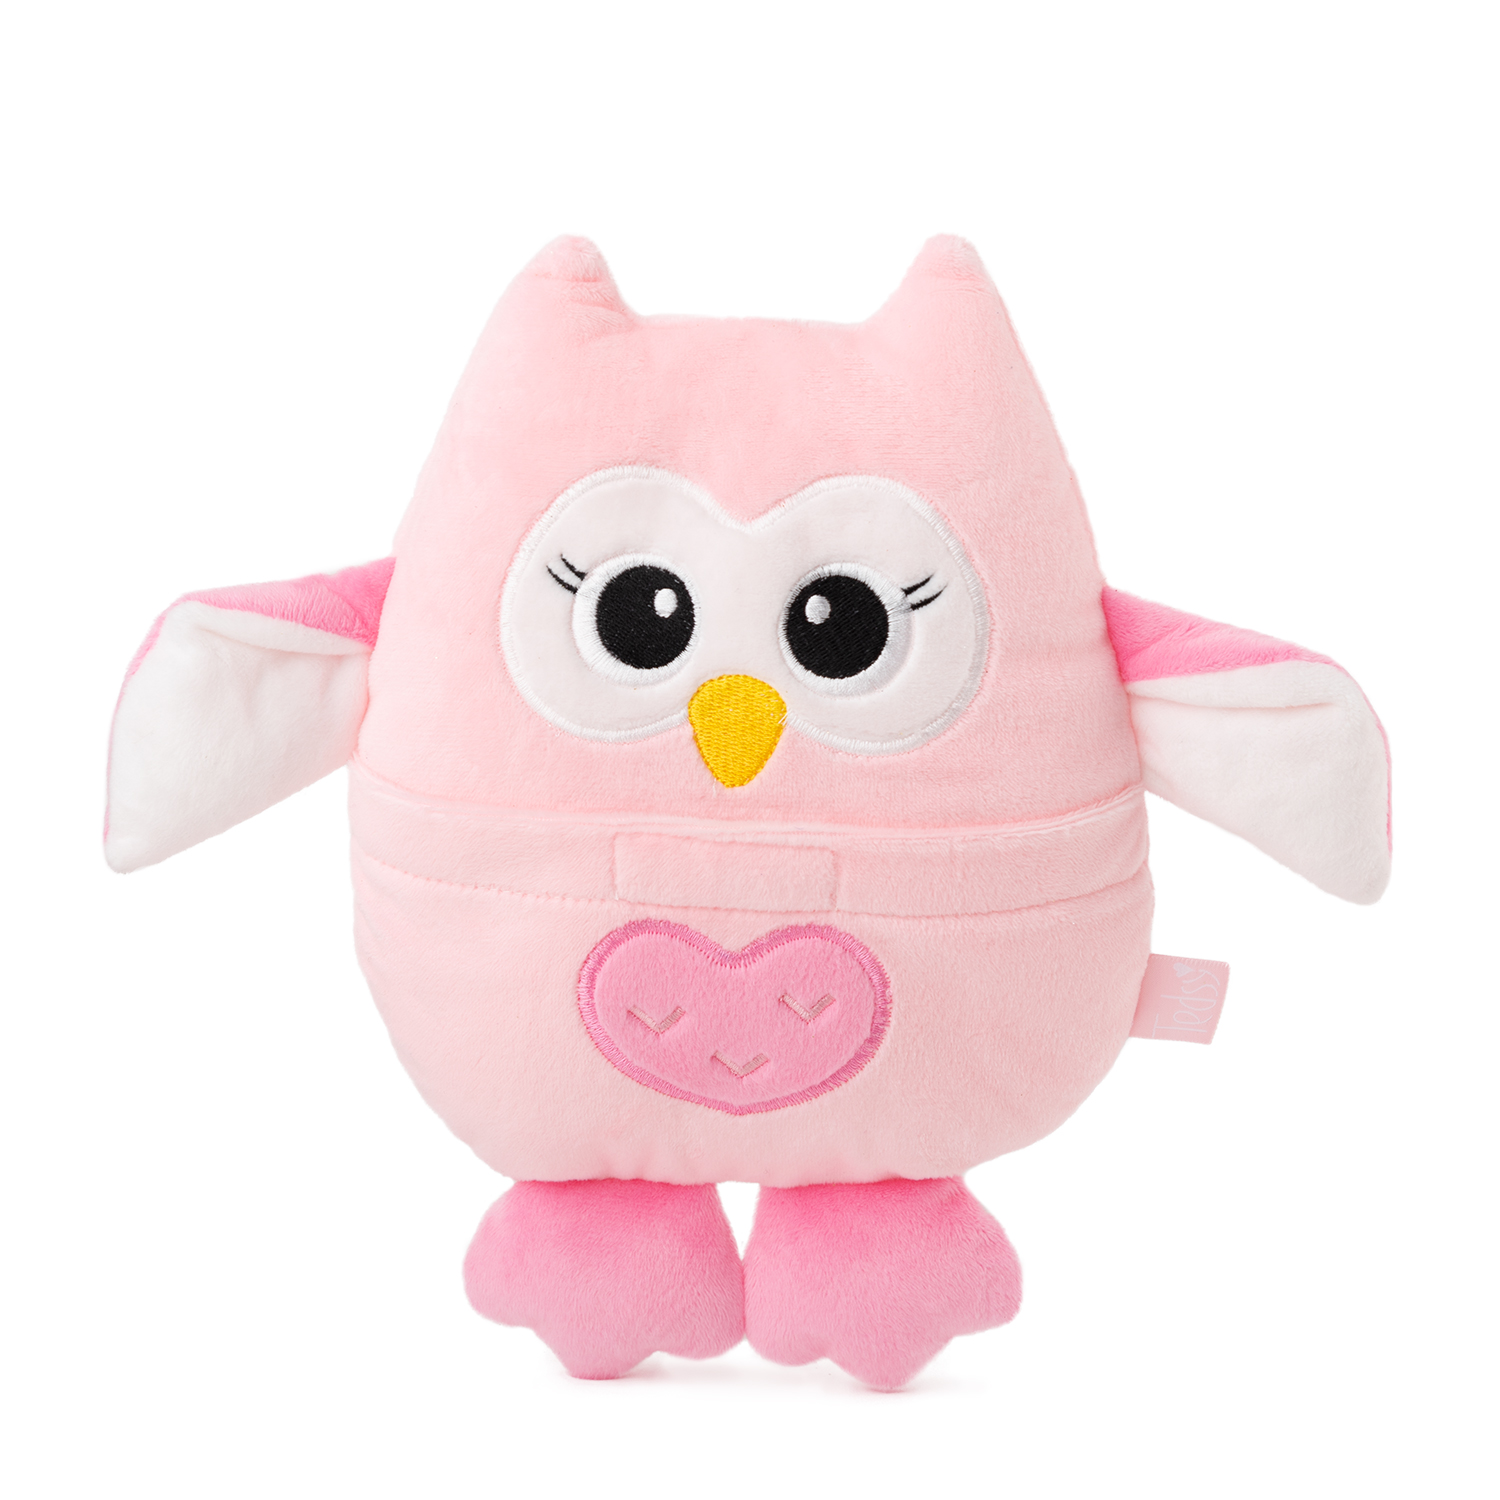 Toy Owl with Cherry Pits - Pink